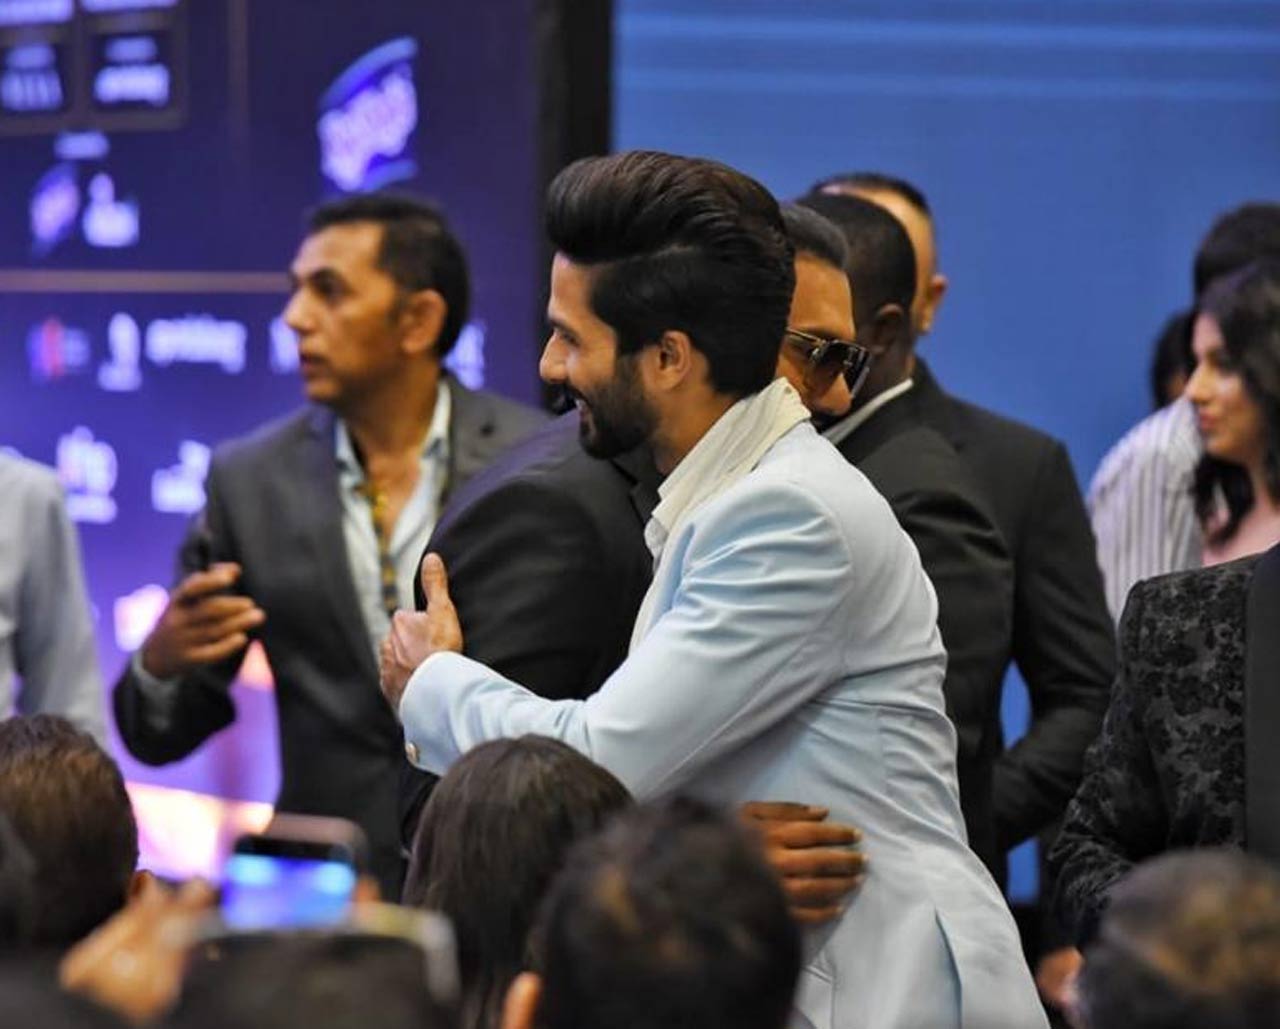 Shahid Kapoor and singer Yo Yo Honey Singh give each other a hug in this candid click. Shahid Kapoor was last seen in Jersey. Yo Yo Honey Singh is best known for his music in films like Khiladi 786, Chennai Express, Boss, Ragini MMS 2, Bhoothnath Returns, Sonu Ke Titu Ki Sweety, and Cocktail